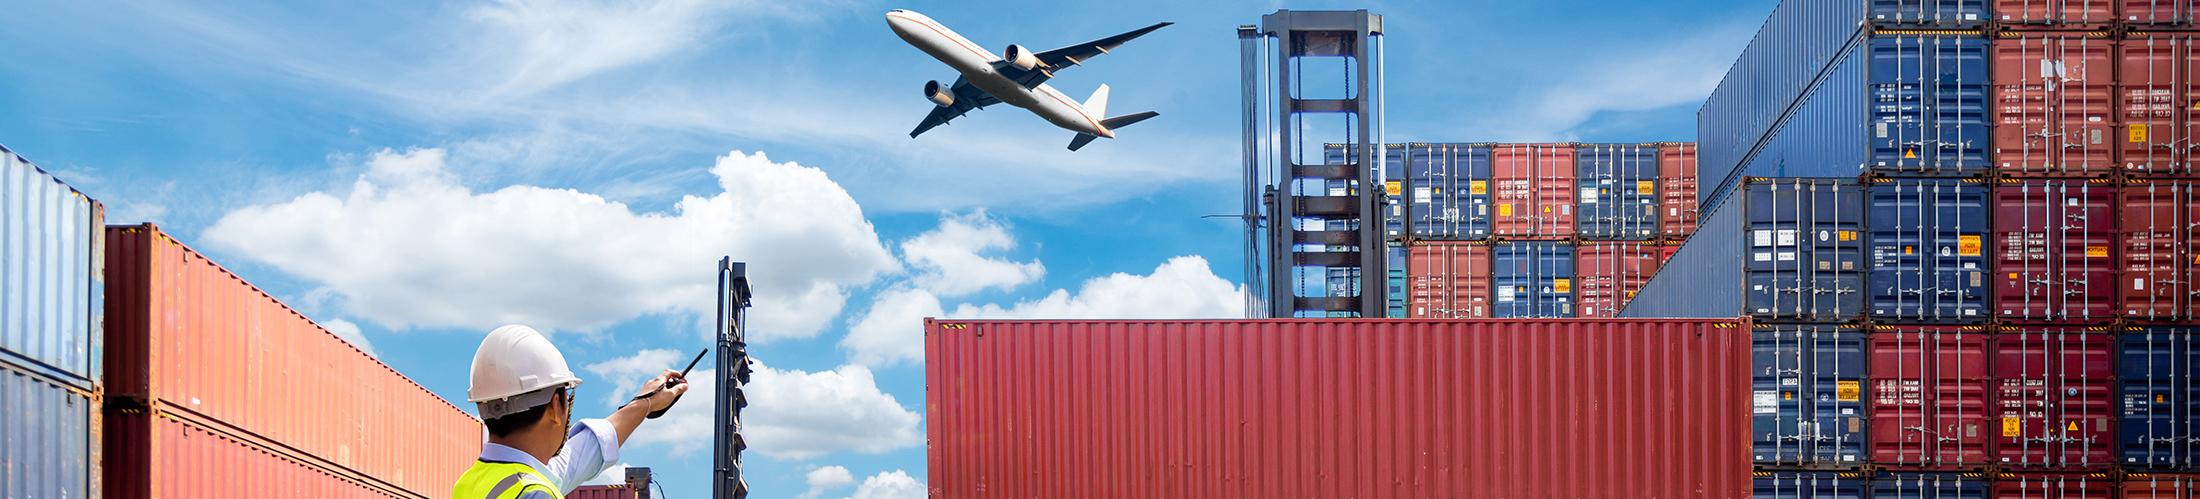 Pane flying over shipping containers with man pointing to the sky in hard hat.